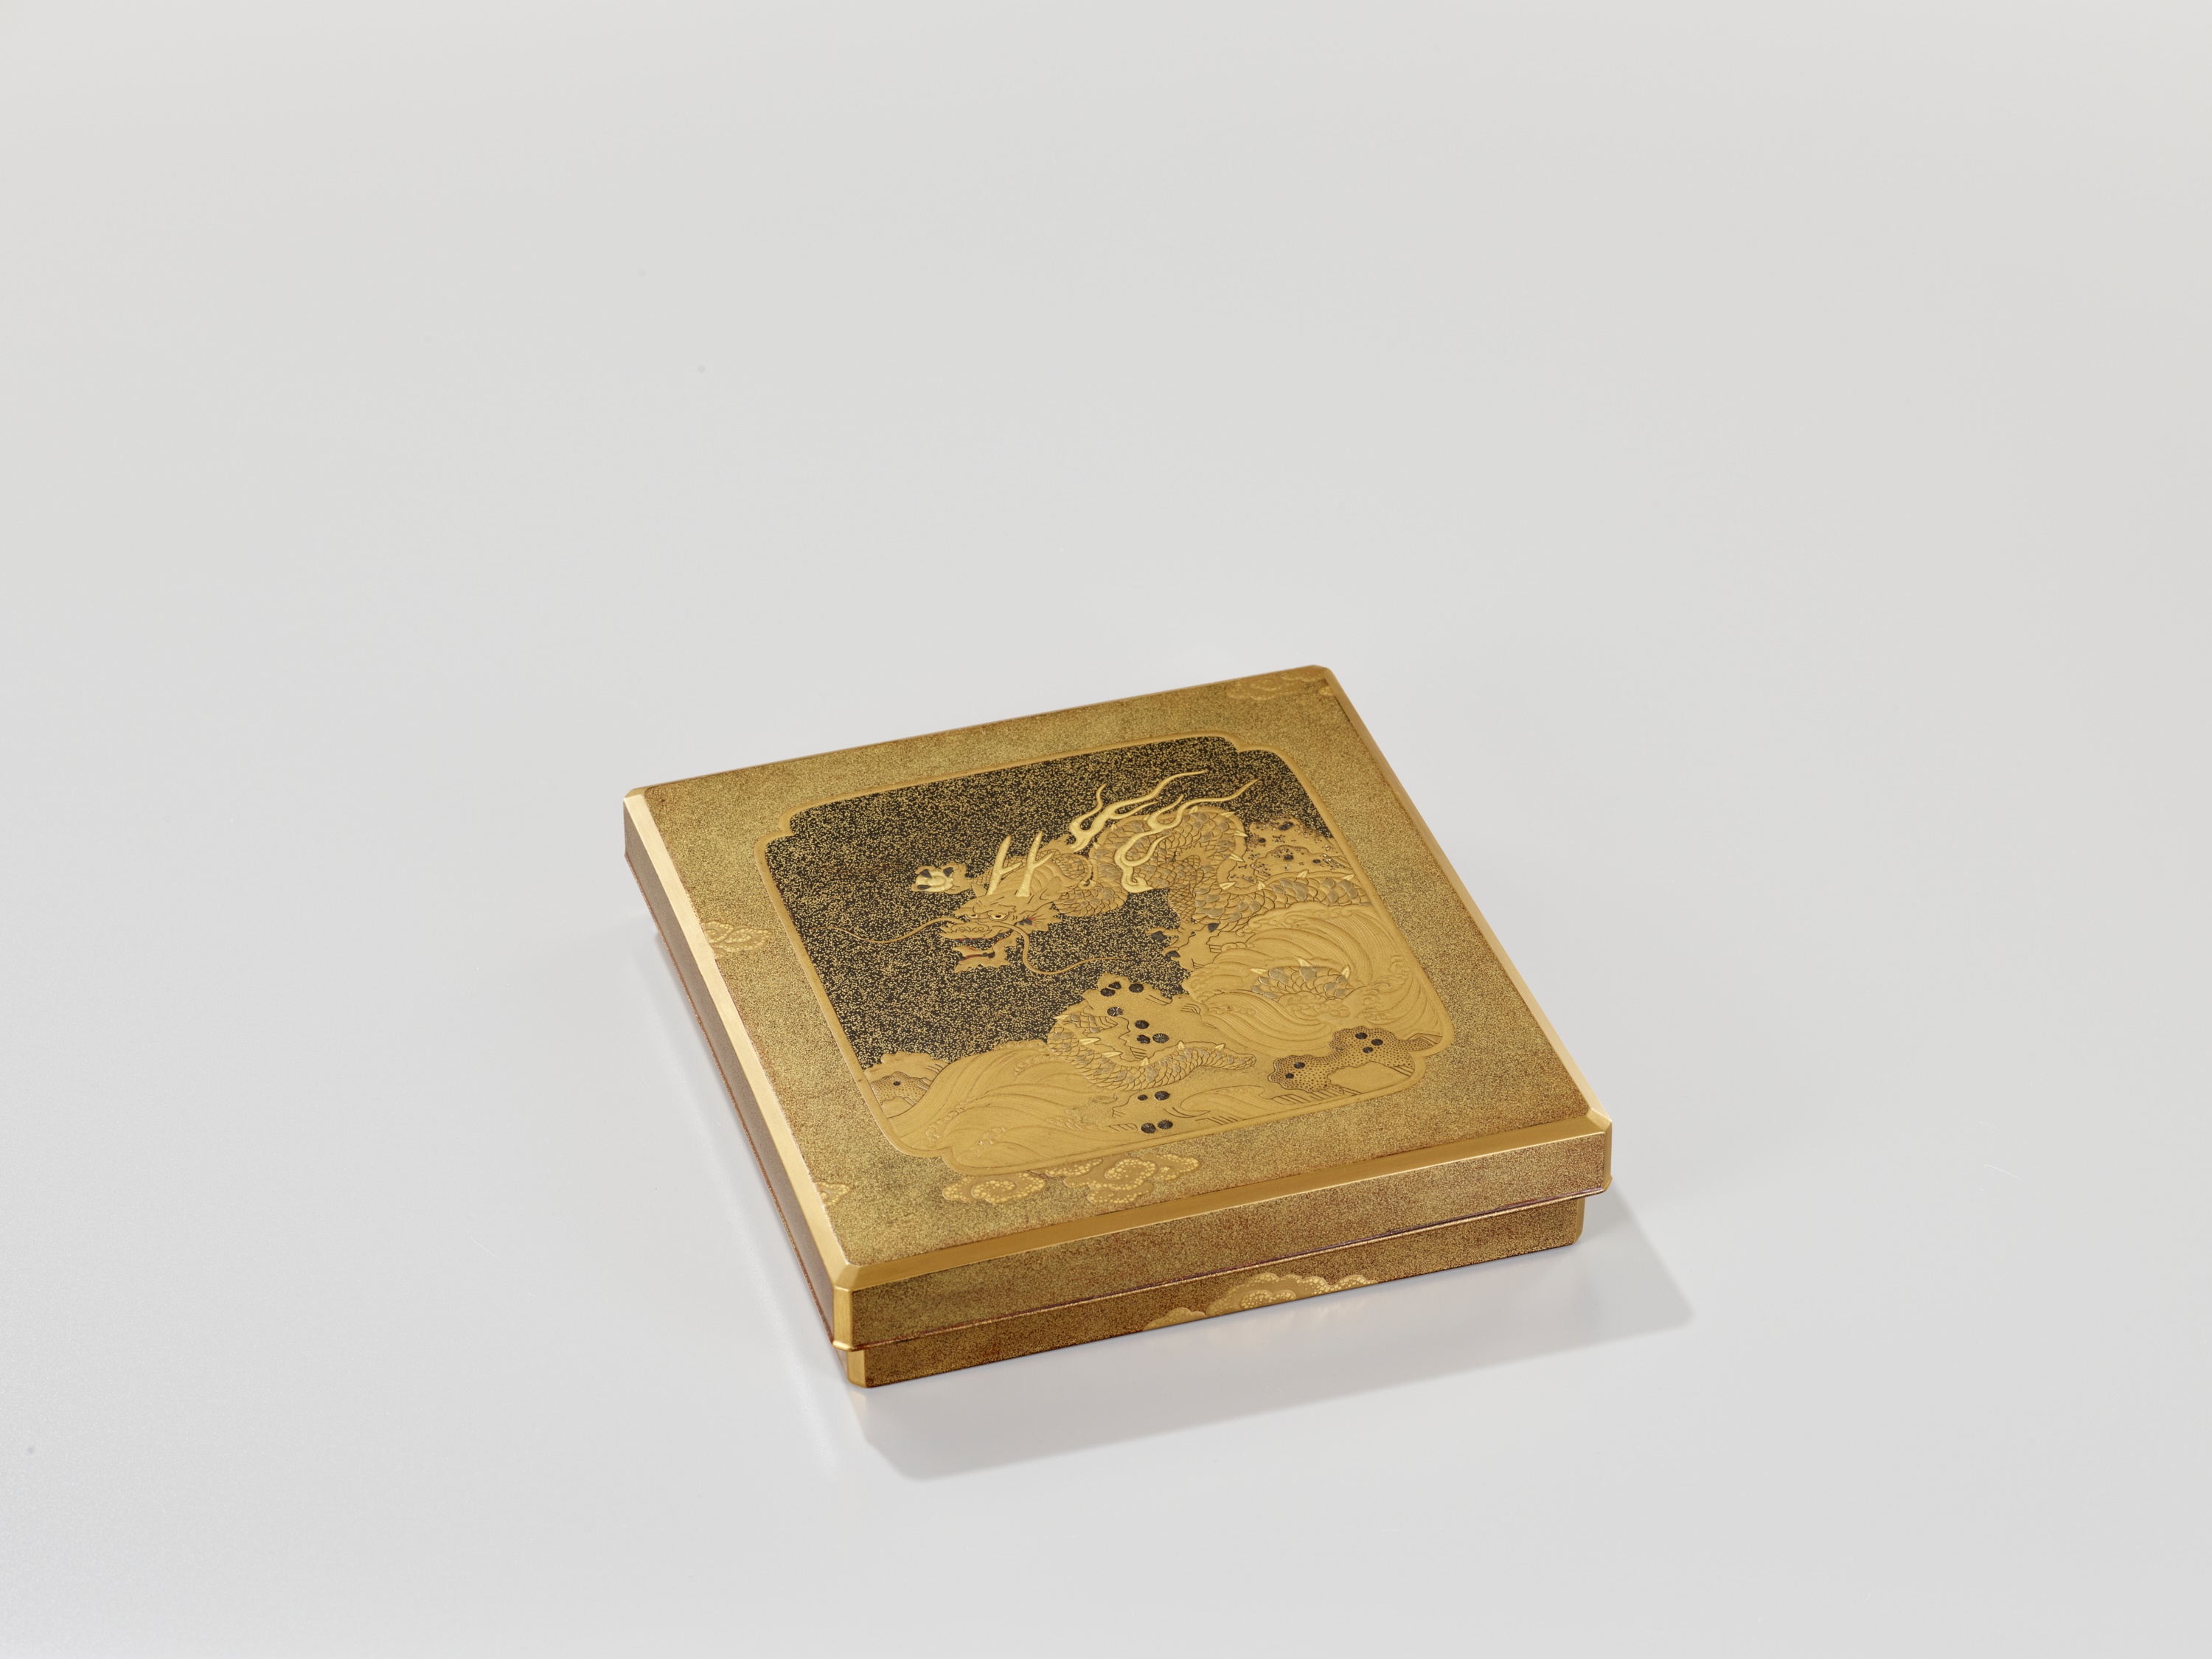 A FINE AND RARE GOLD LACQUER SUZURIBAKO DEPICTING A DRAGON, TIGERS, AND A LEOPARD (FEMALE TIGER) - Image 7 of 12